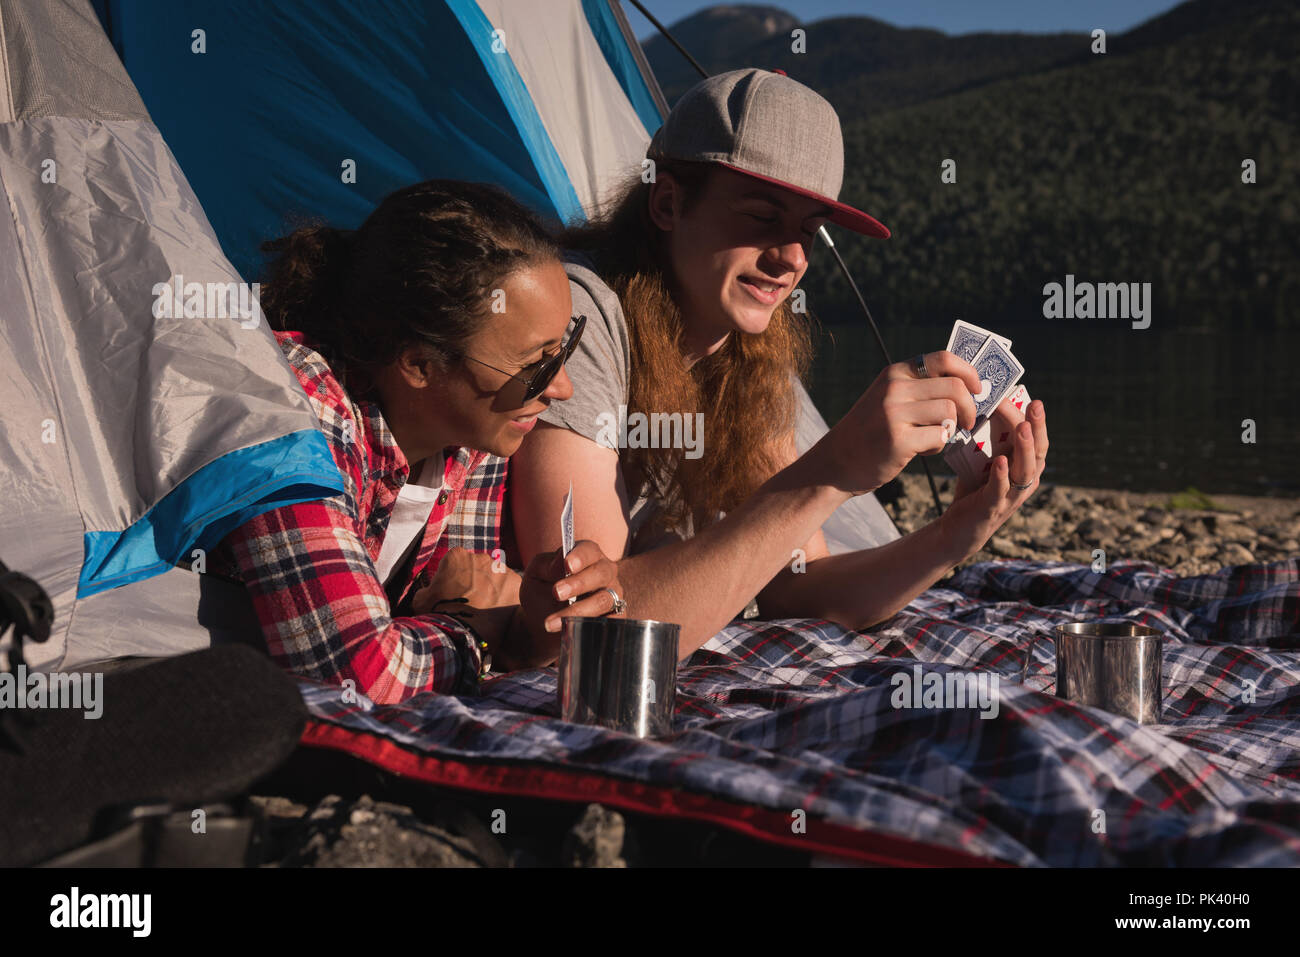 Couple playing with playing cards Stock Photo